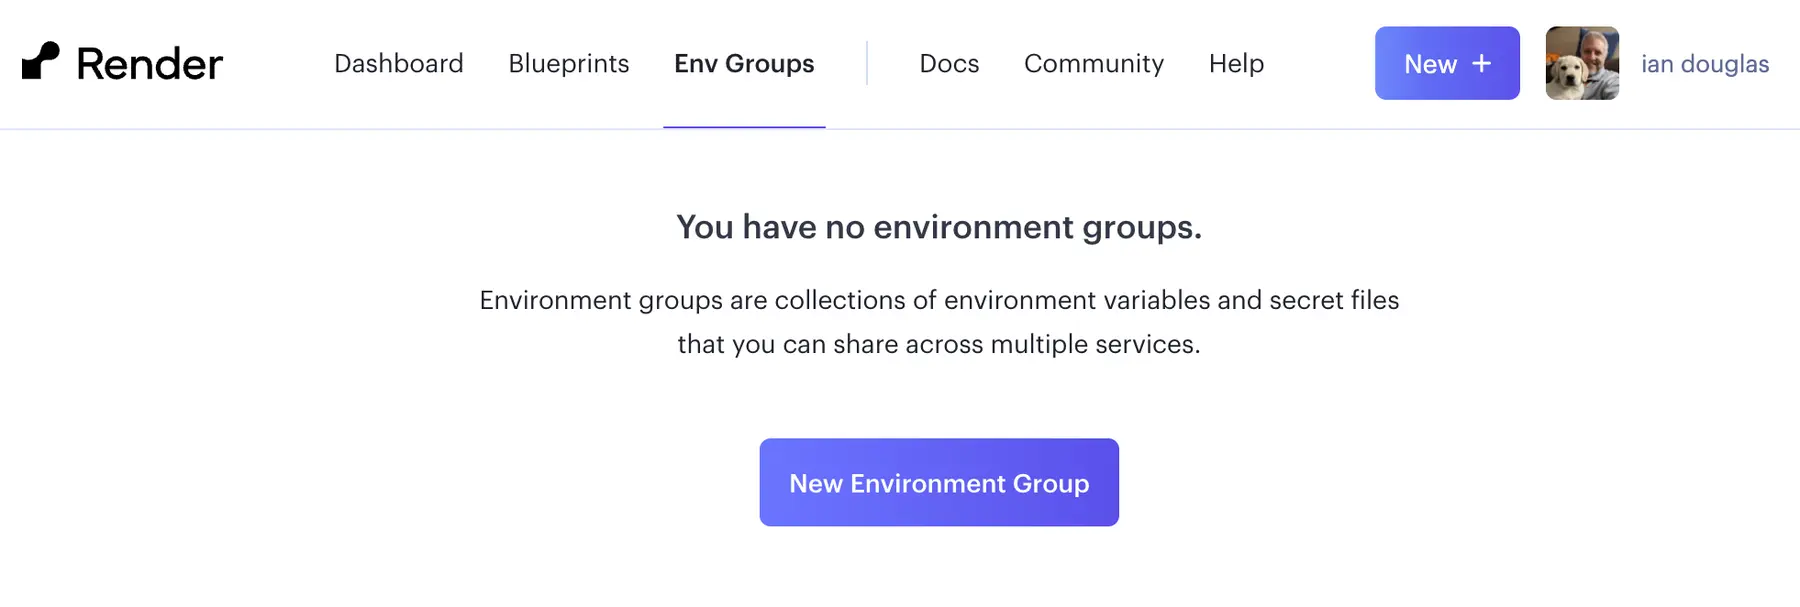 Screenshot showing how to access the Environment Groups from the Render Dashboard